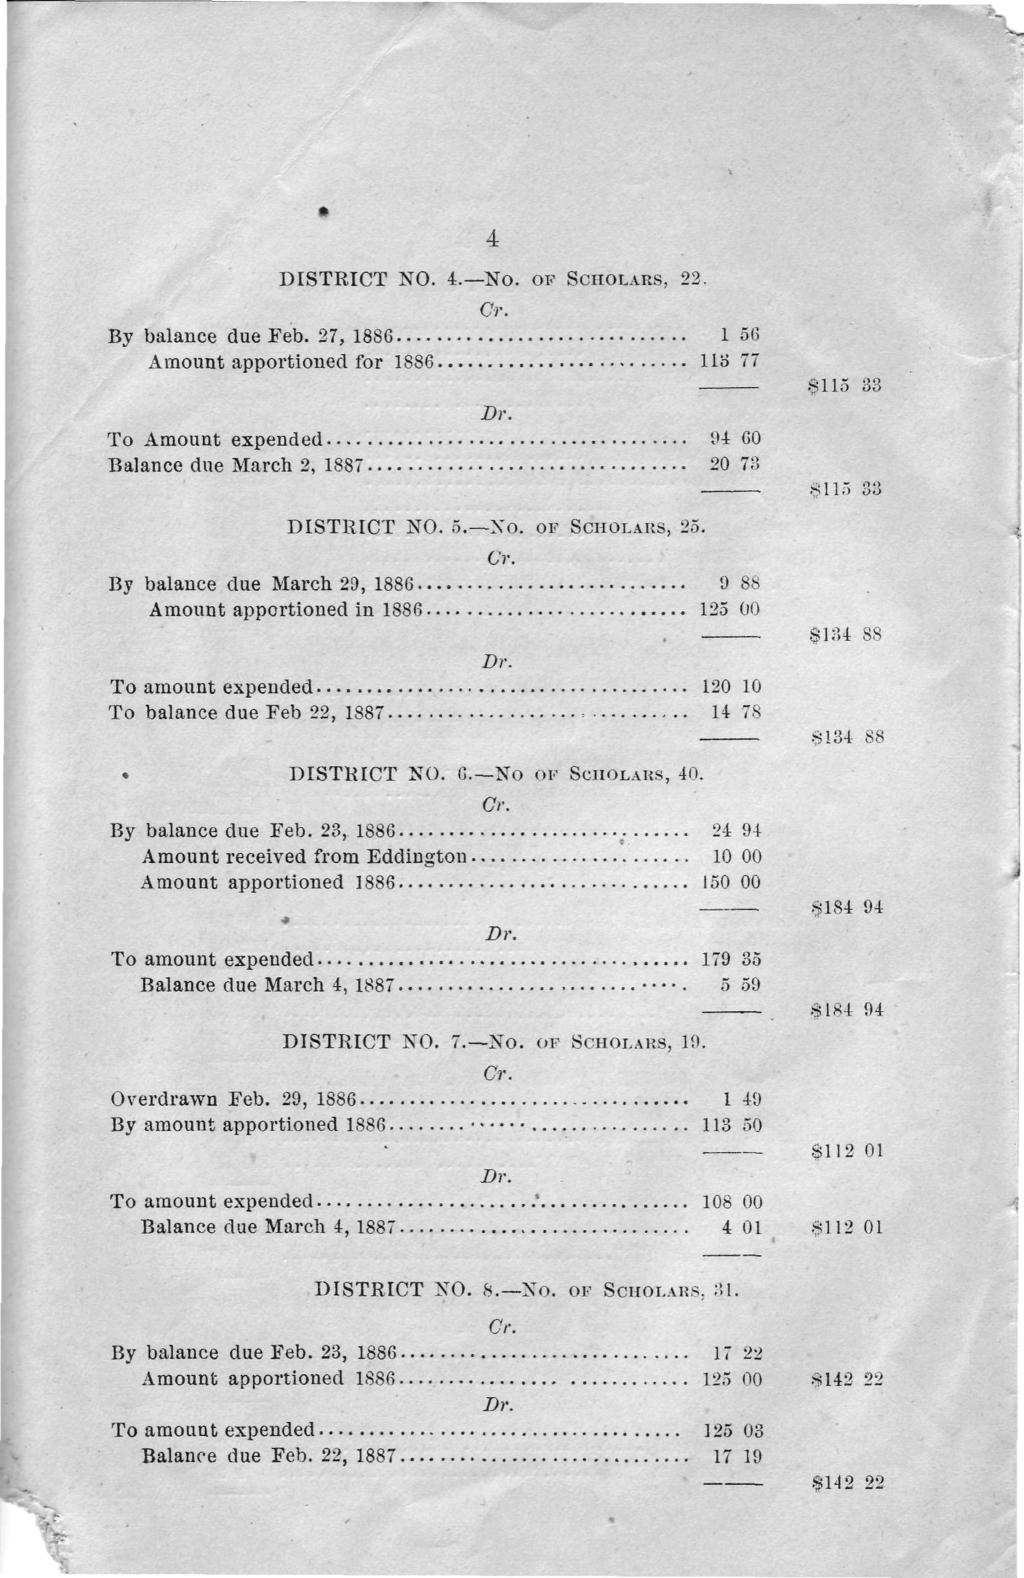 4 DISTRICT NO. 4. No. OF SCHOLARS, 22. By balance due Feb. 27, 1886 1 56 Amount apportioned for 1886 lib 77 To Amount expended 94GO Balance due March 2, 1887 20 73 8115 33 DISTRICT NO. 5. No. OF SCHOLARS, 25.